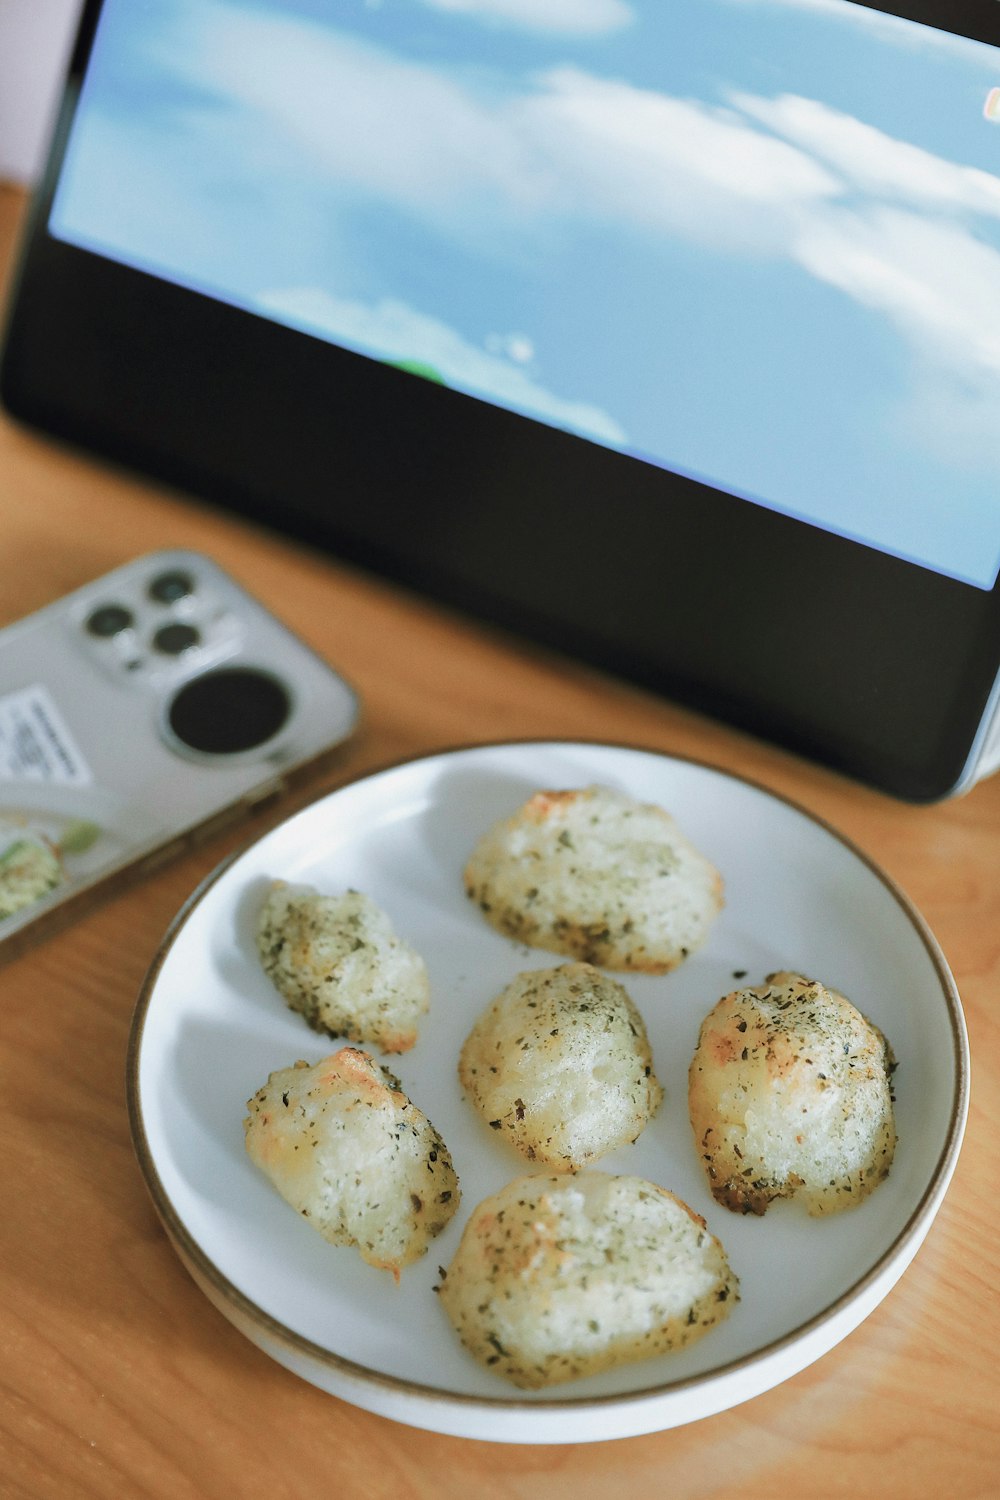 a plate of food next to a remote control